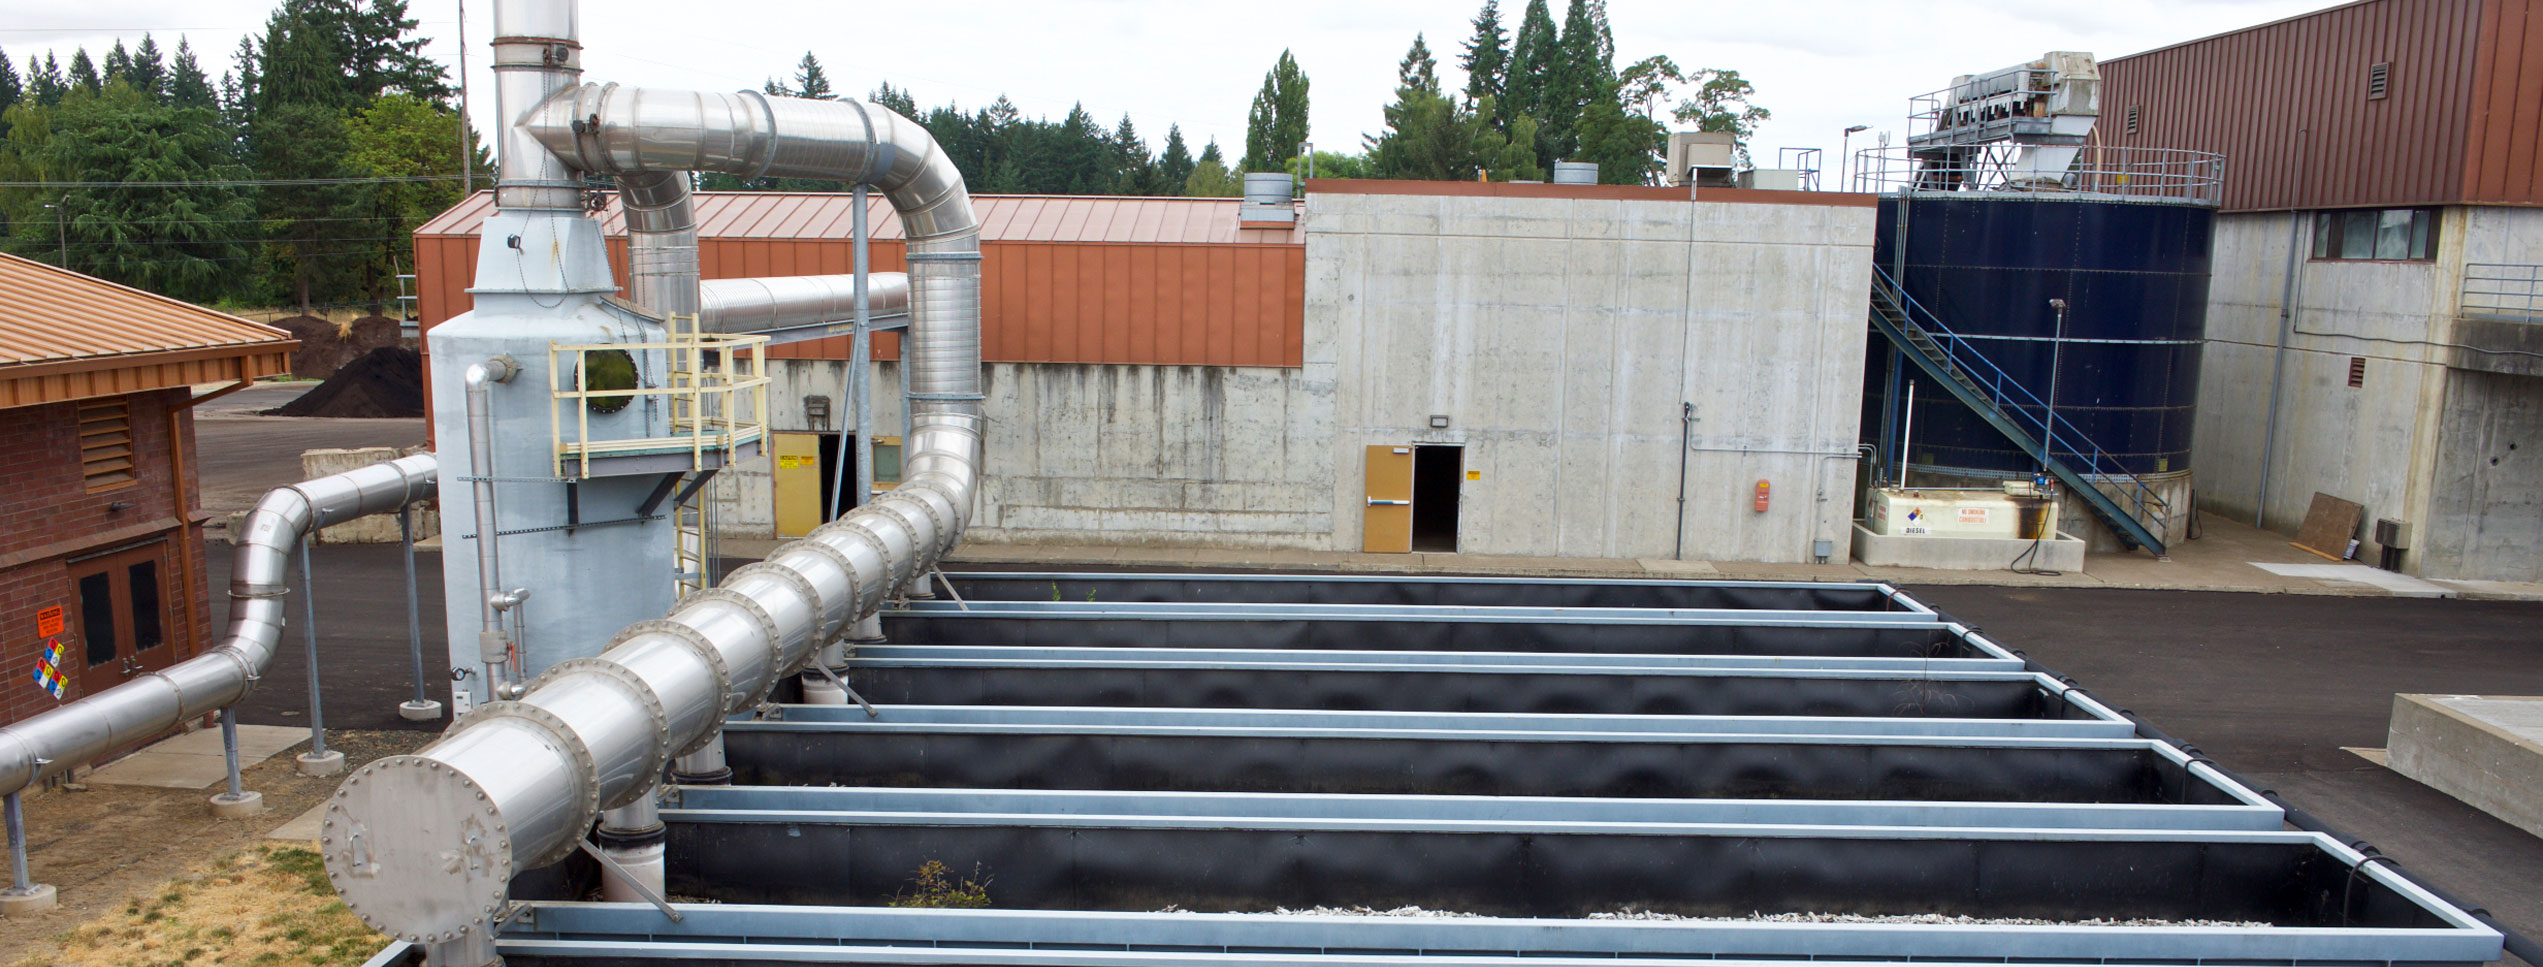 wastewater treatment plant construction in Newberg